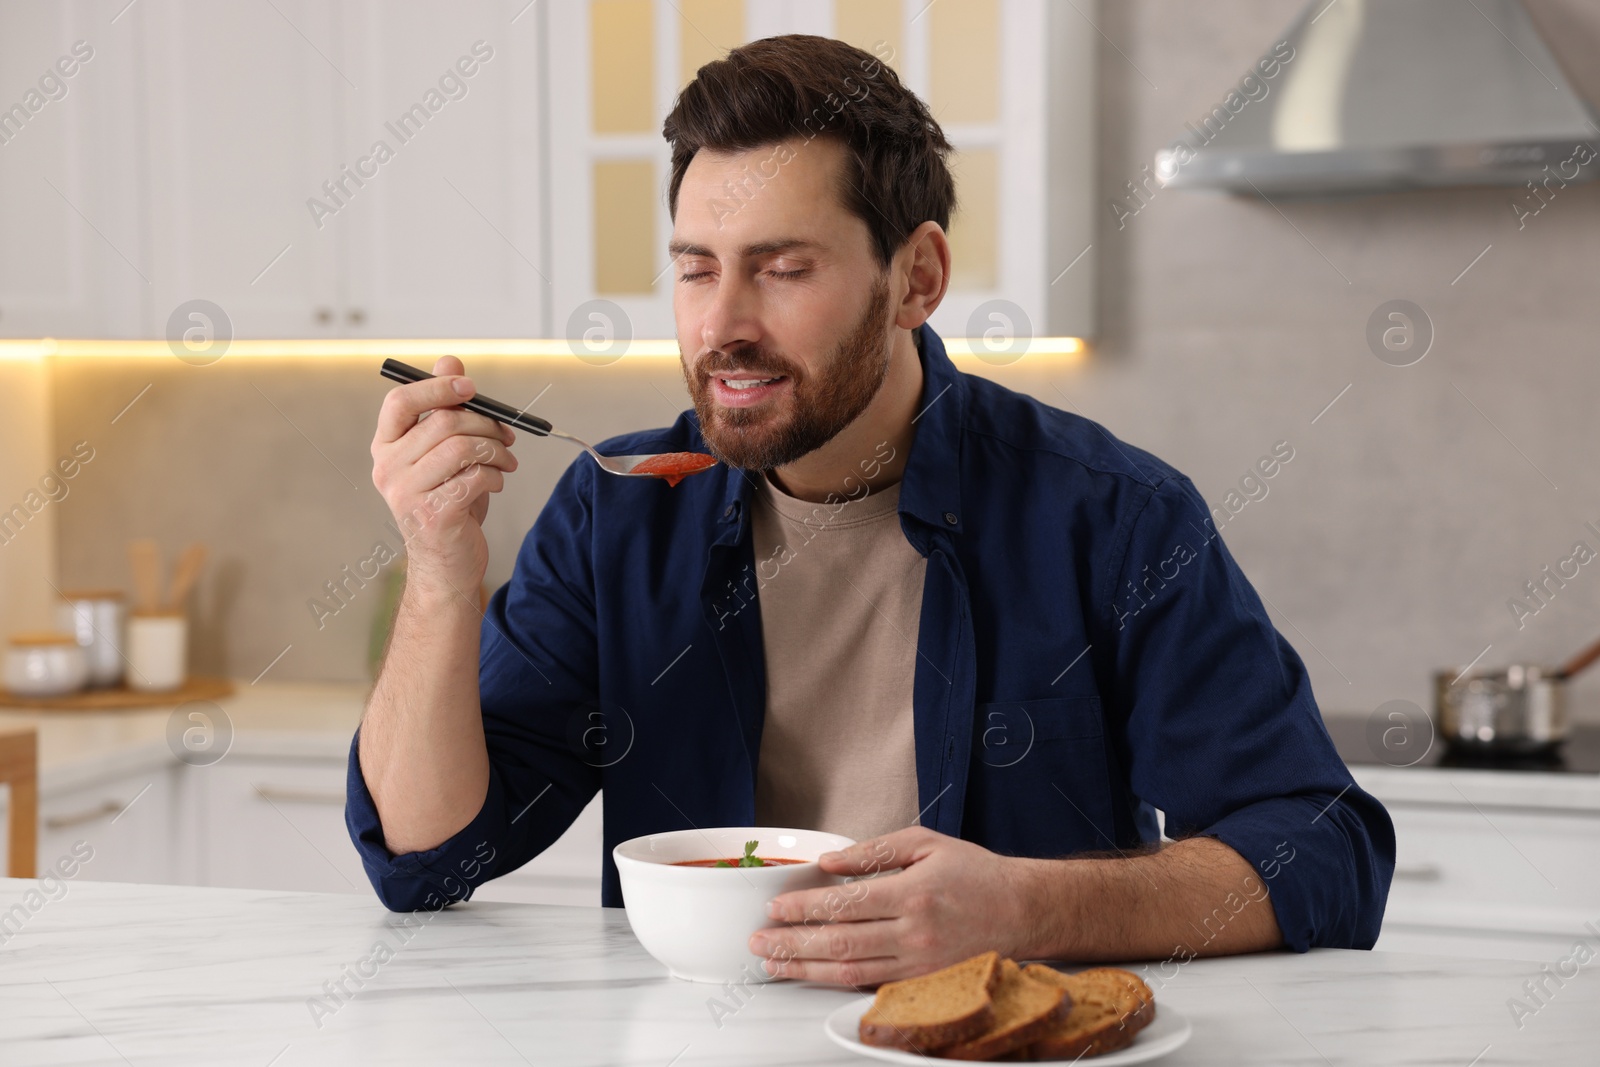 Photo of Man eating delicious tomato soup at light marble table in kitchen